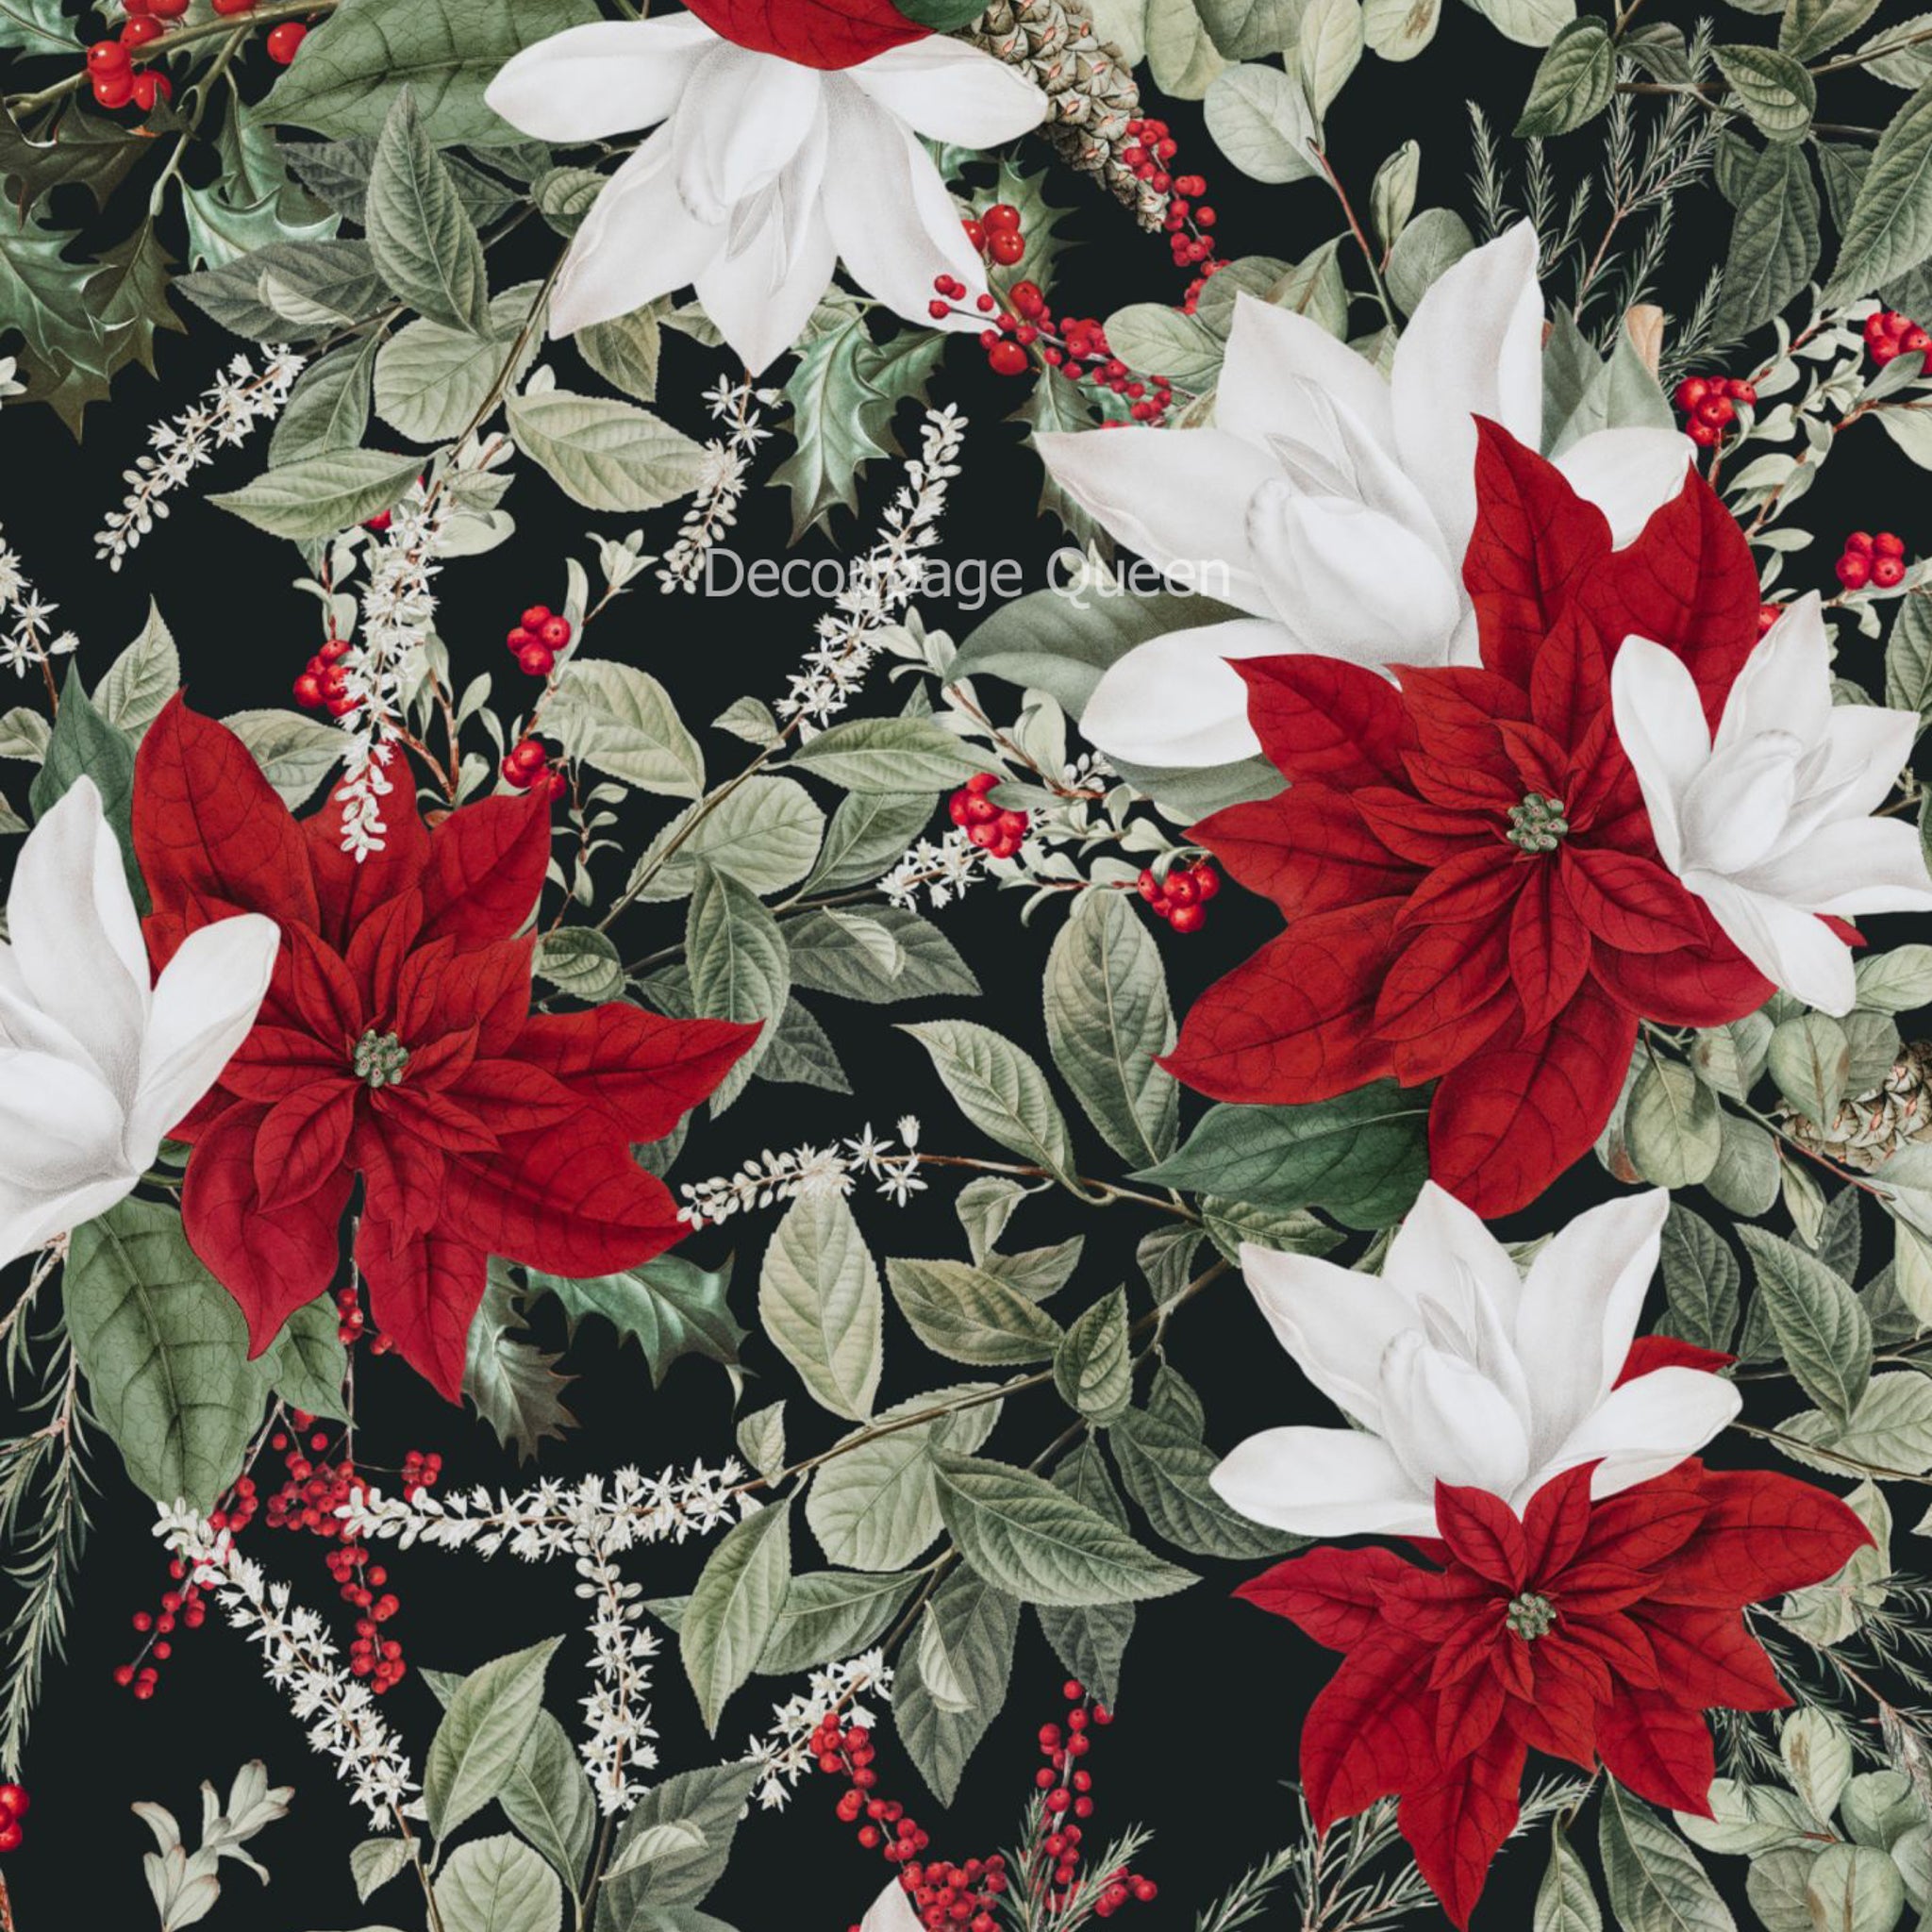 A2 rice paper design of red and white poinsettias with leaves on a black background.